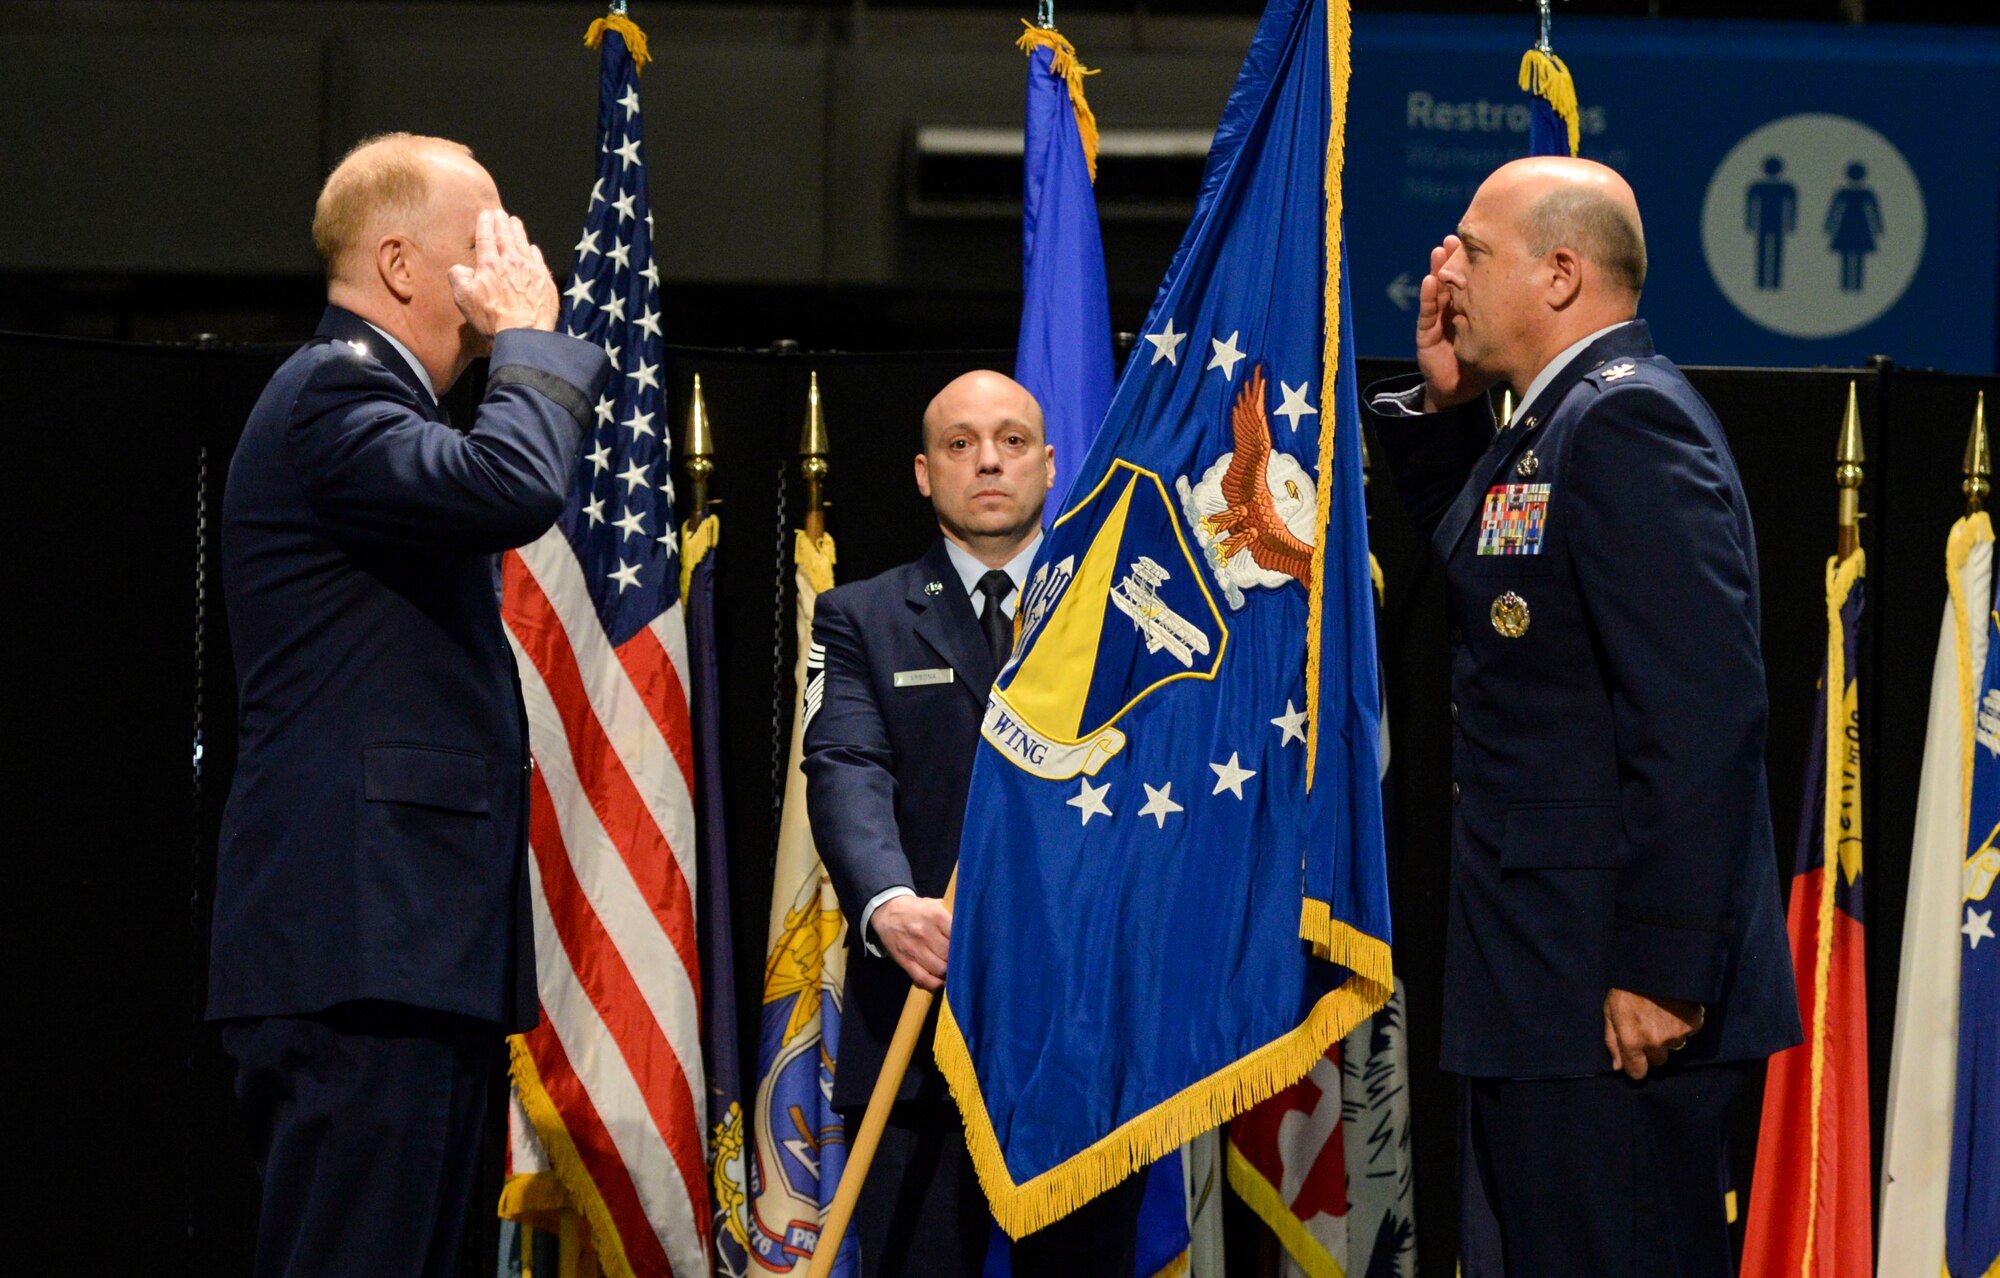 U.S. Air Force Col. Patrick Miller, assumes command of the 88th Air Base Wing from Lt. Gen. Robert McMurry, Air Force Life Cycle Management Center commander, during a change of command ceremony inside the National Museum of the United States Air Force at Wright-Patterson Air Force Base, Ohio, June 12, 2020. Col. Miller replaced Col. Thomas Sherman. This year's change of command ceremony was different from years past with no more than 50 people in attendance but instead broadcasted live over social media and no contact between principles due to the COVID-19 pandemic. (U.S. Air Force photo by Wesley Farnsworth)